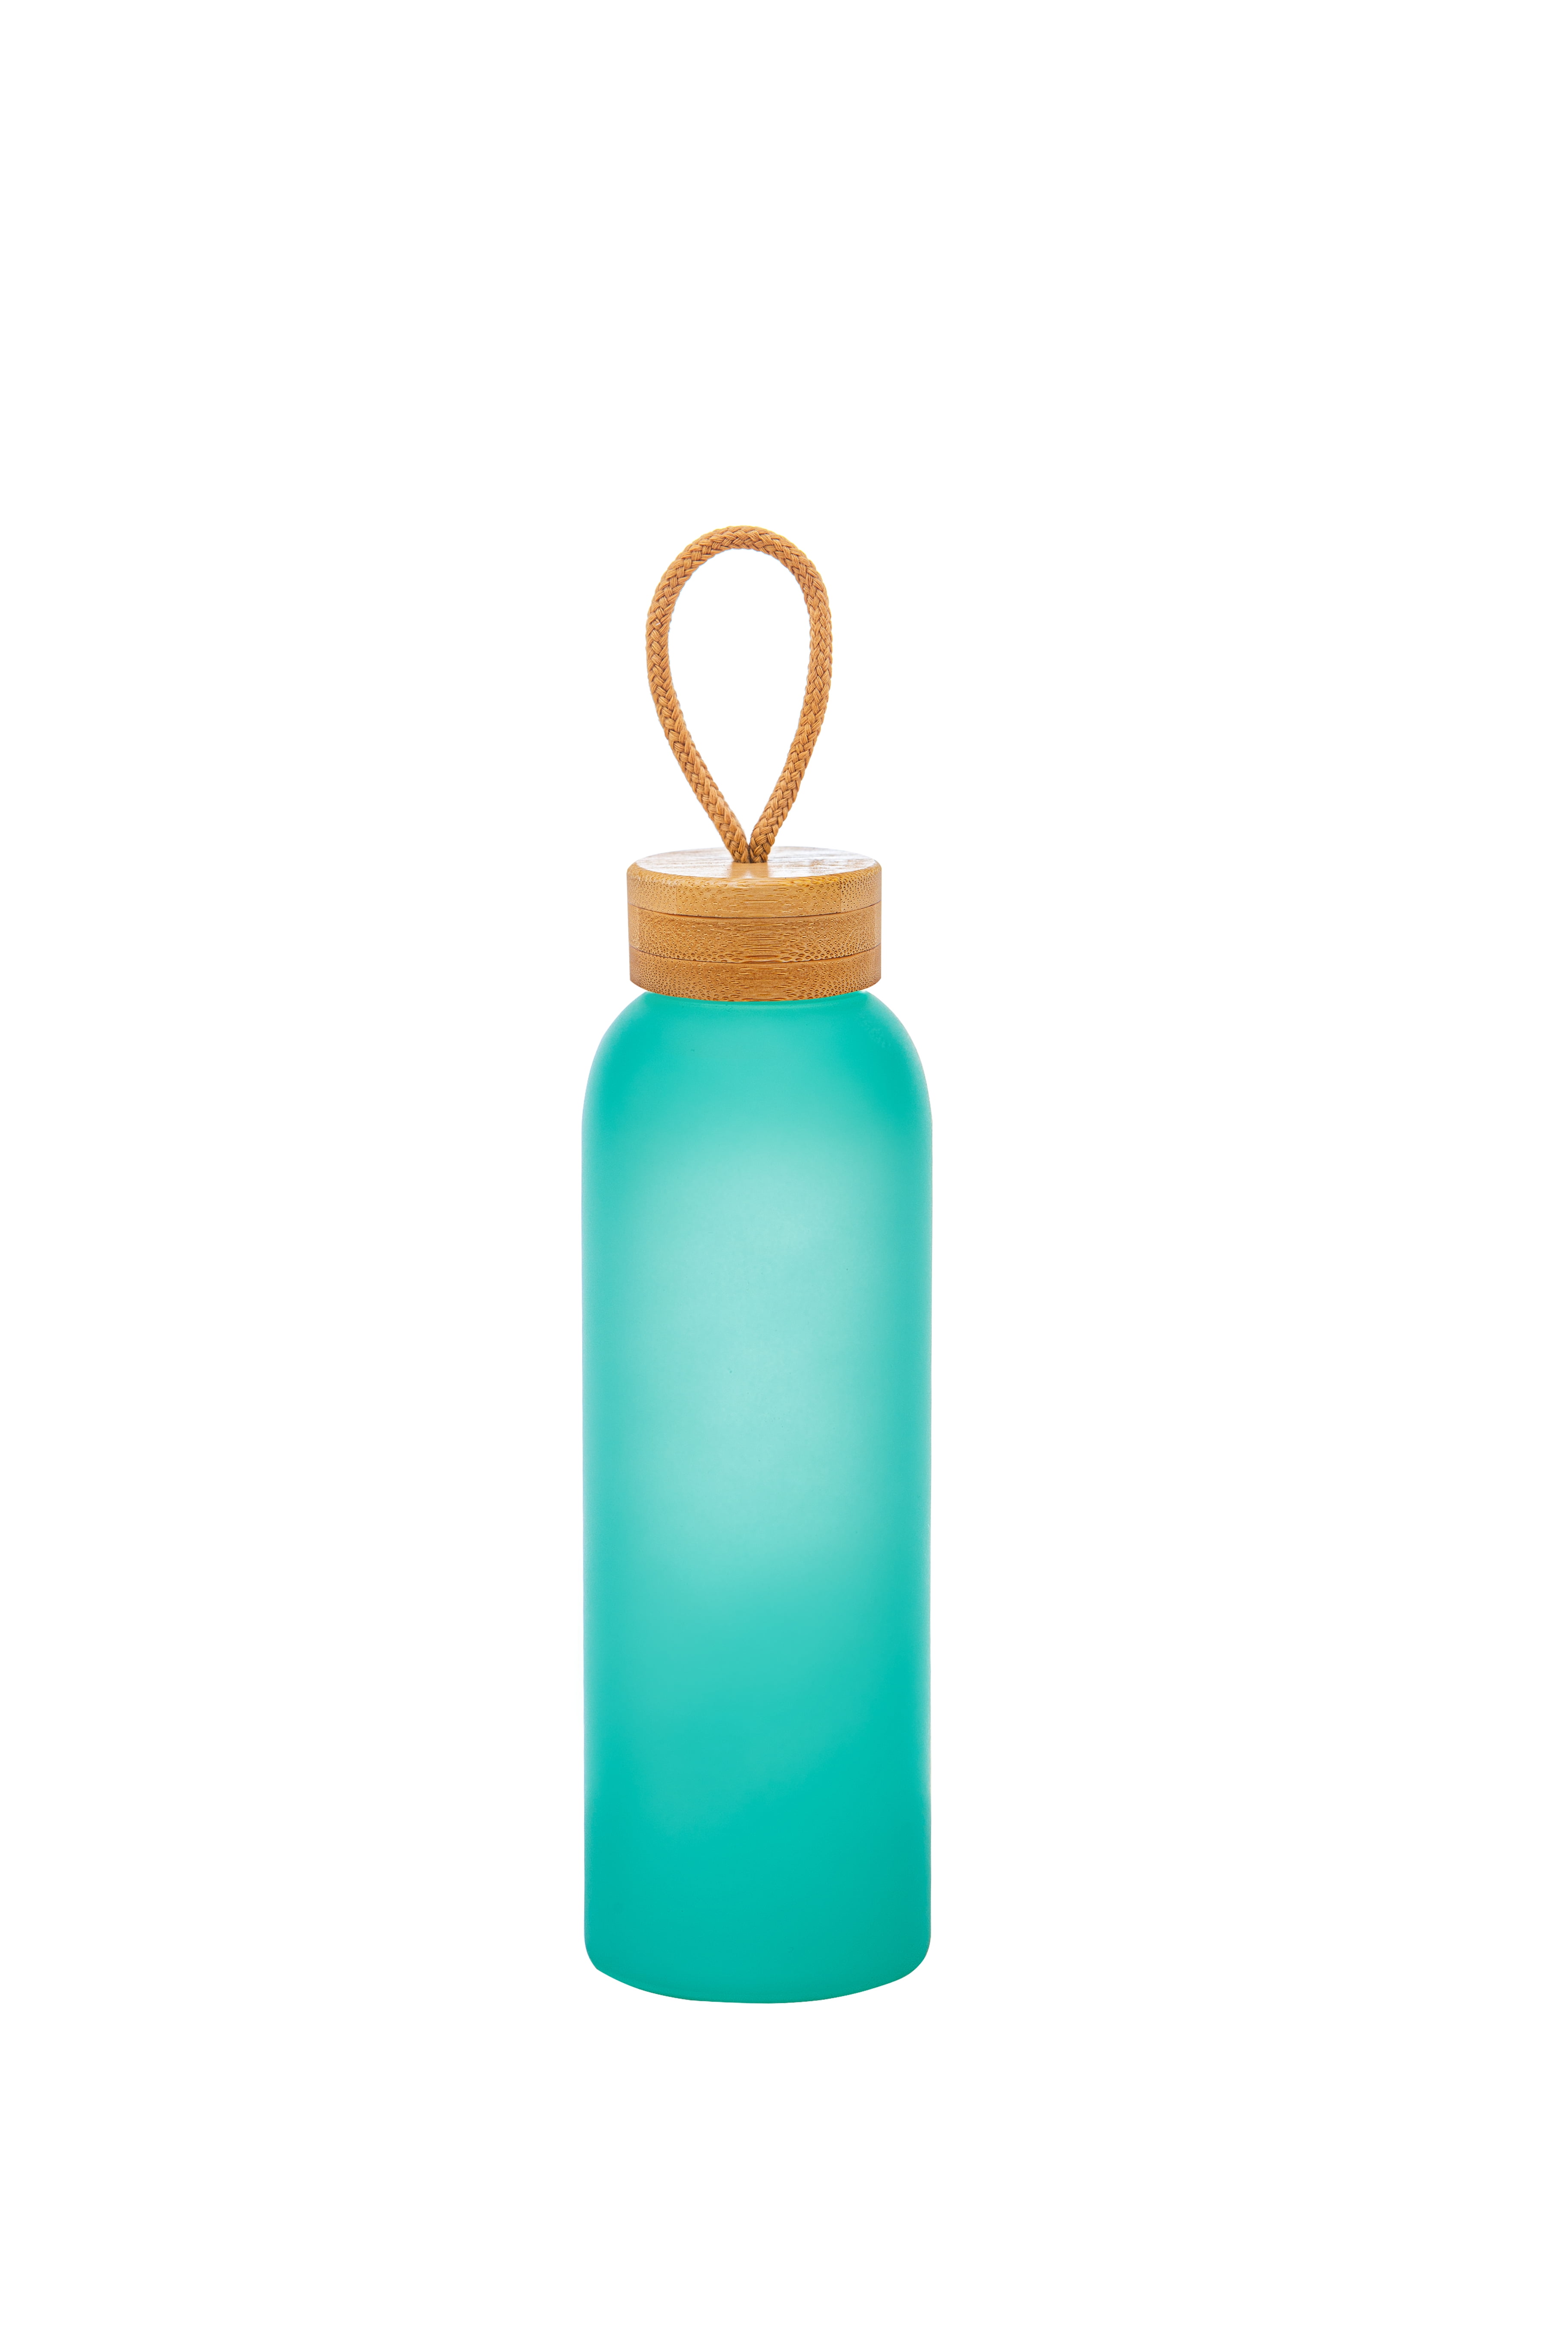 Mainstays Bamboo Lid 25 Oz Frosted Glass Bottle, Aqua 